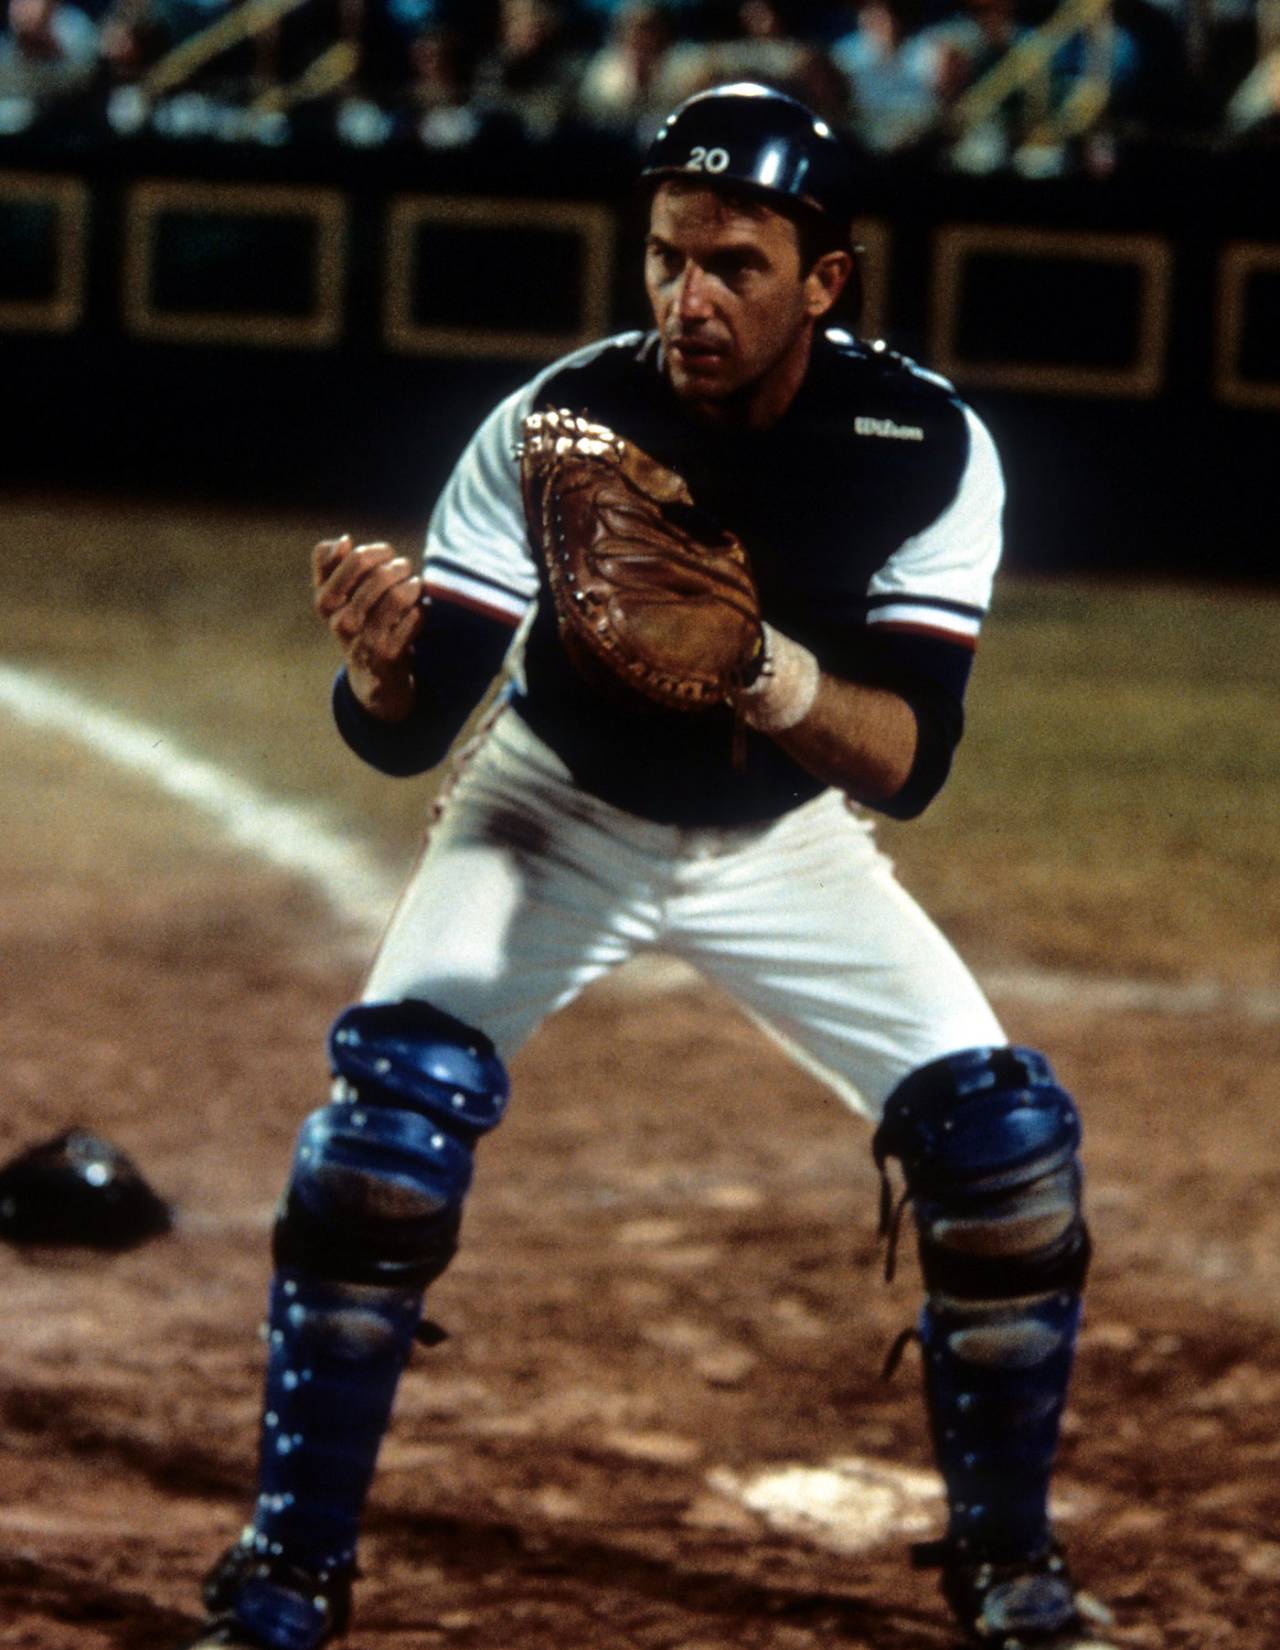 Kevin Costner plays catcher on a baseball team in a scene from the film <i>Bull Durham</i>, 1988